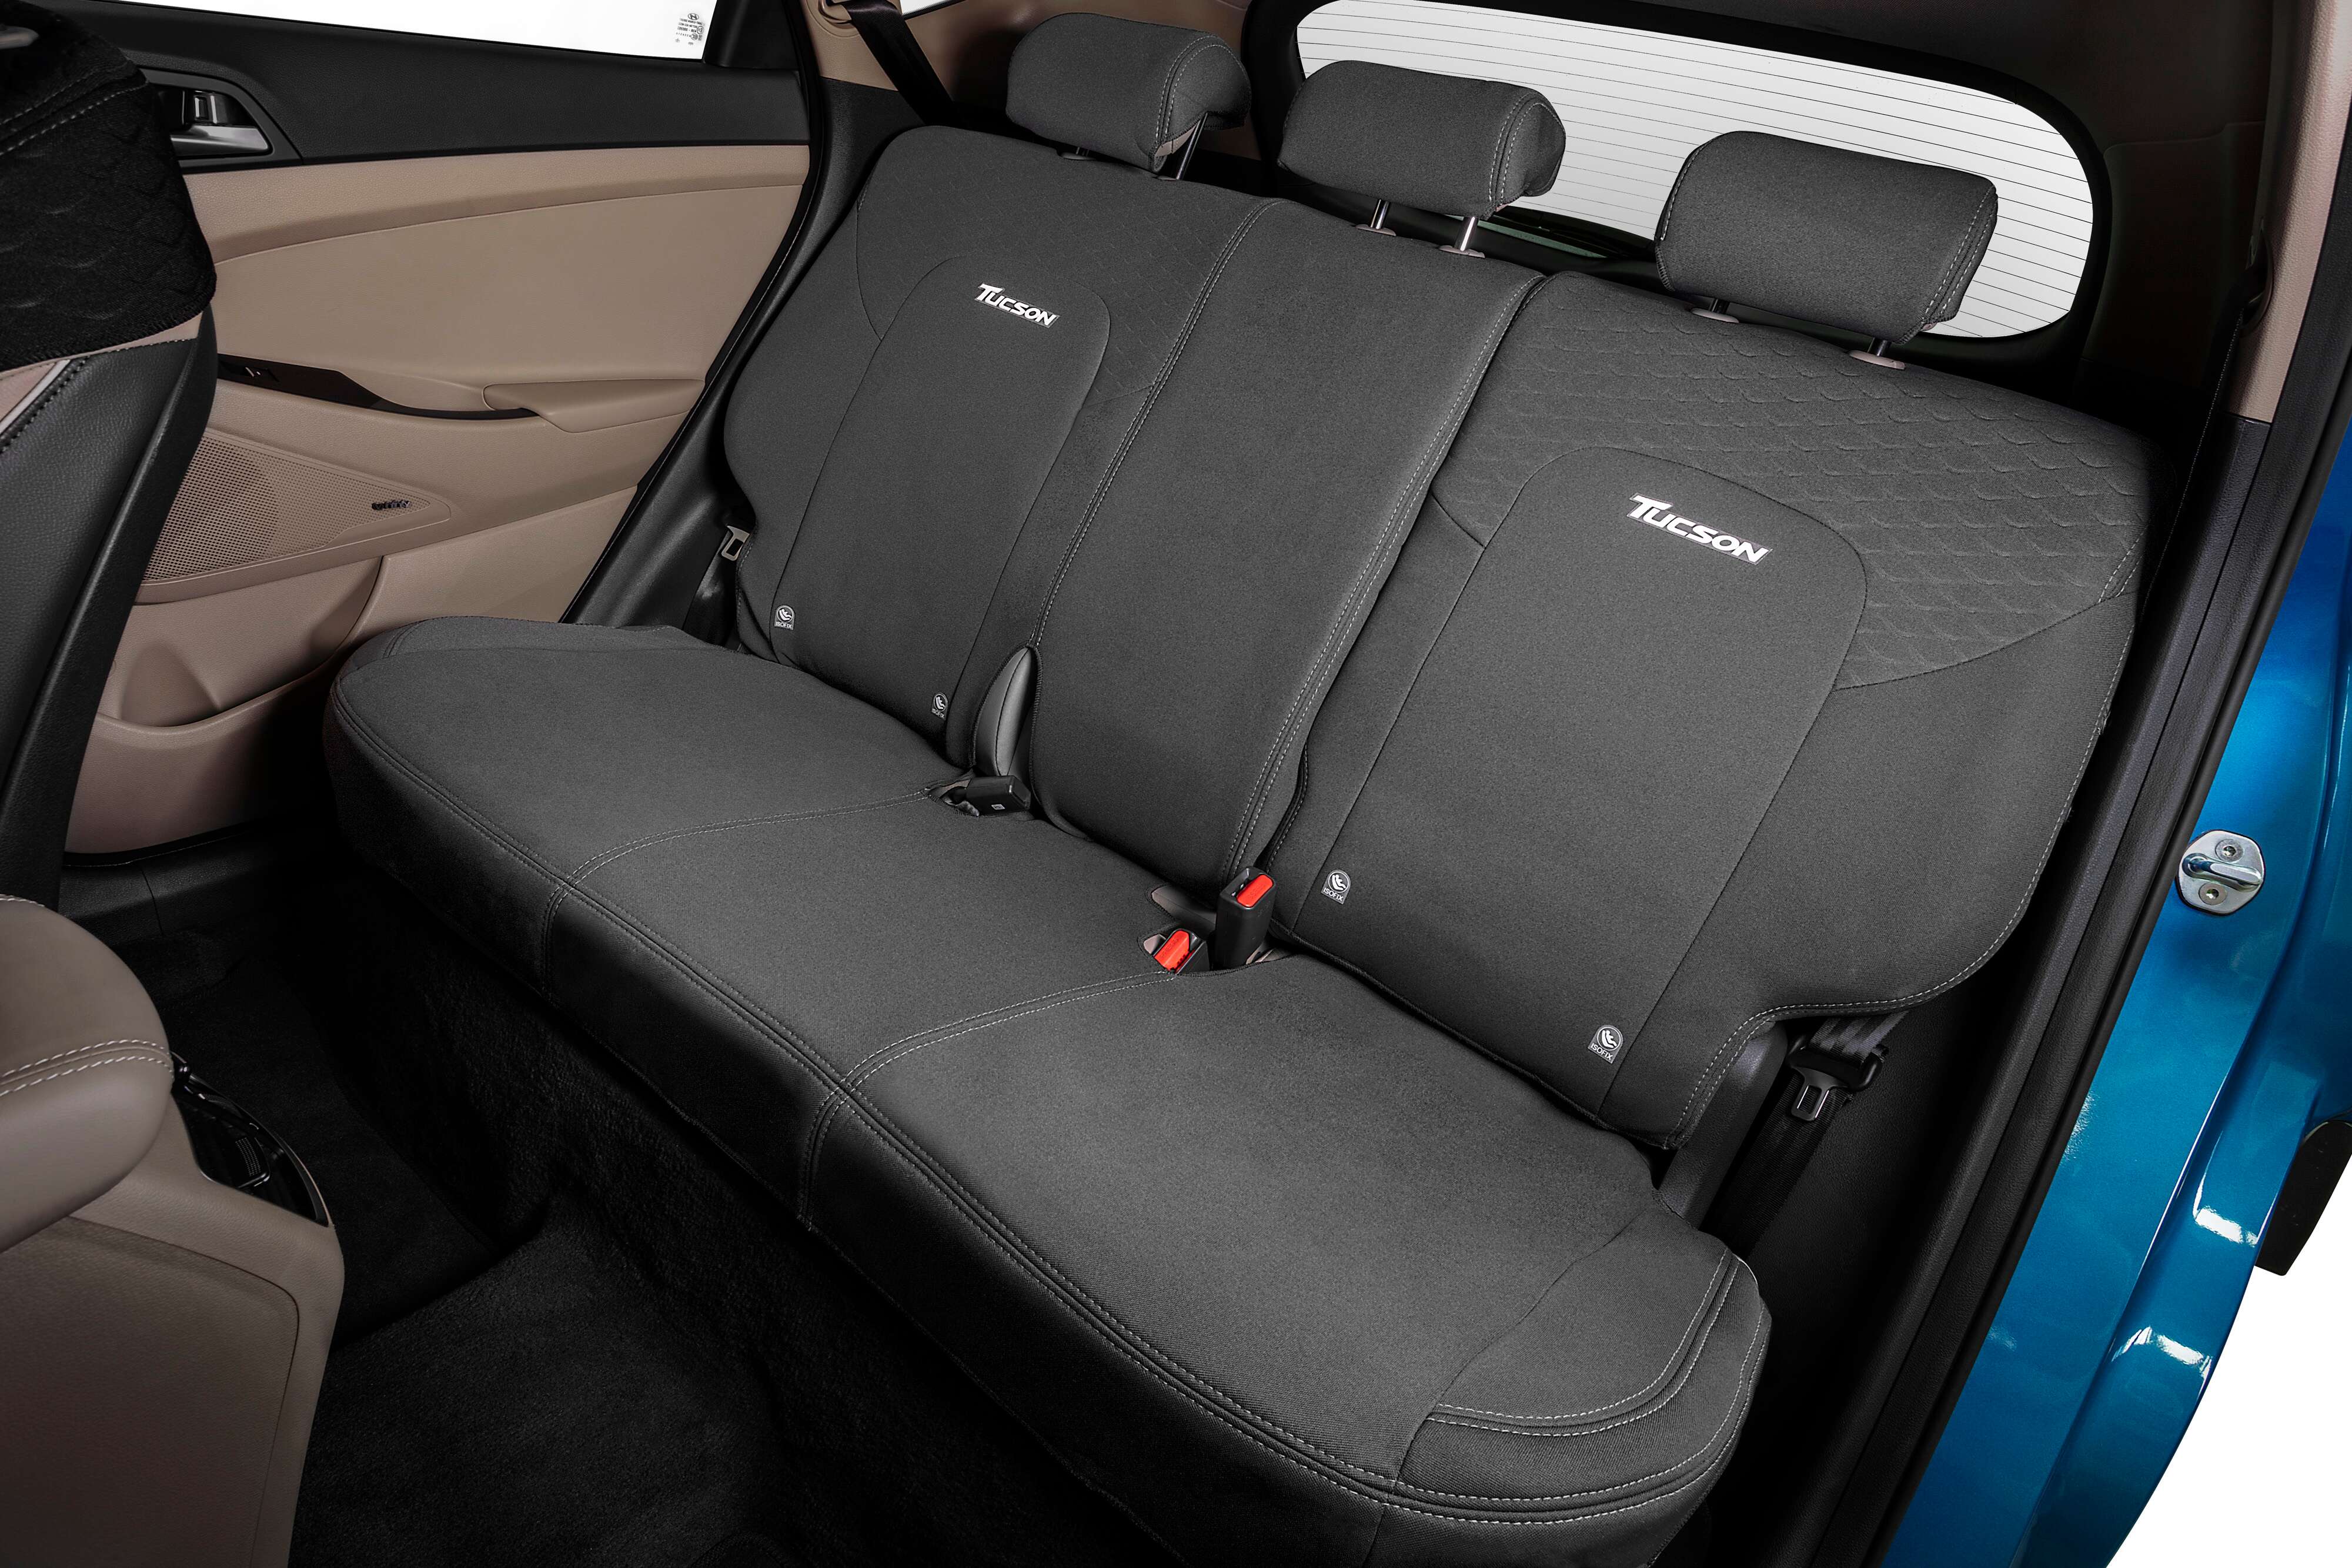 Tucson_accessories_RearSeatCover_800x600.jpg